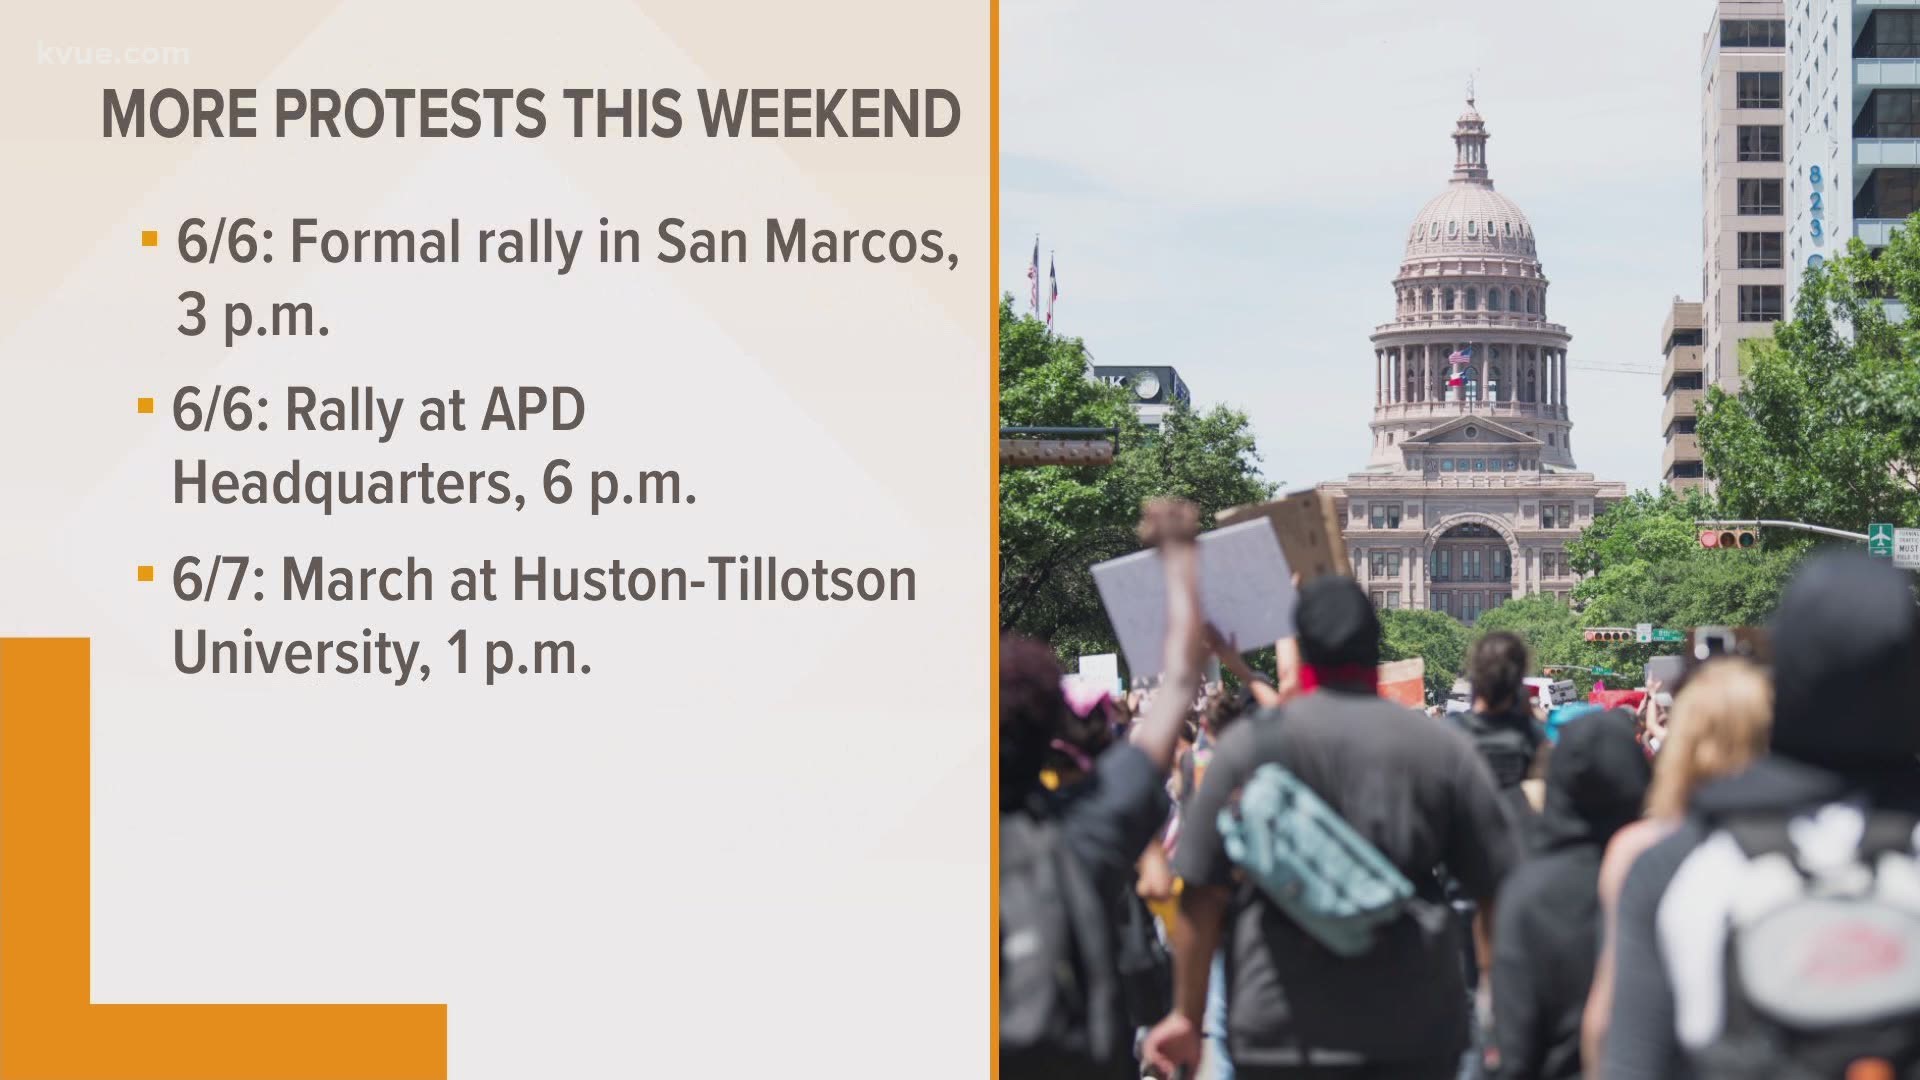 More protests in Austin are scheduled over the weekend to stand up against racial oppression, social injustice and police brutality.